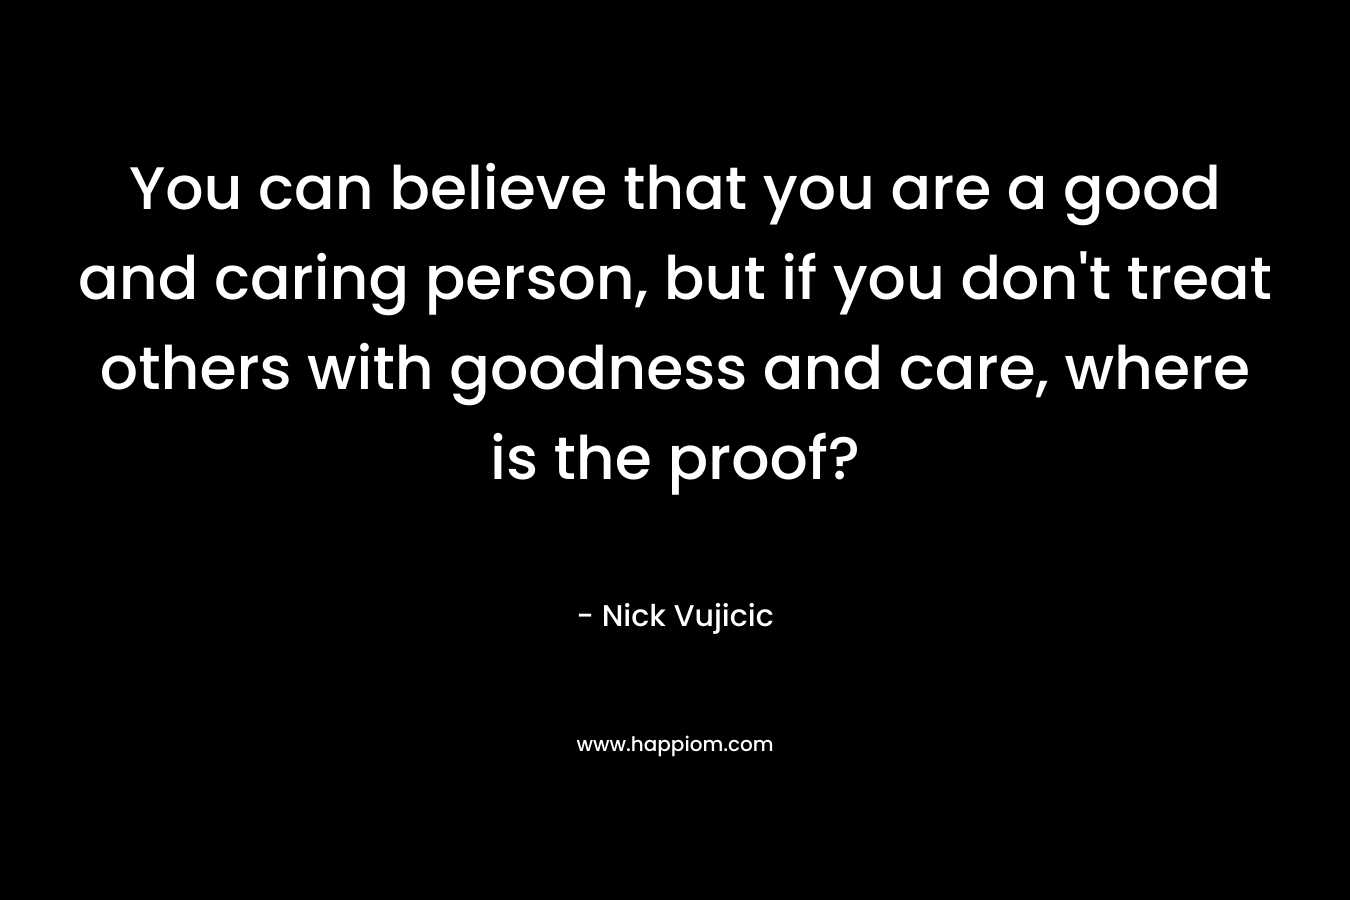 You can believe that you are a good and caring person, but if you don’t treat others with goodness and care, where is the proof? – Nick Vujicic